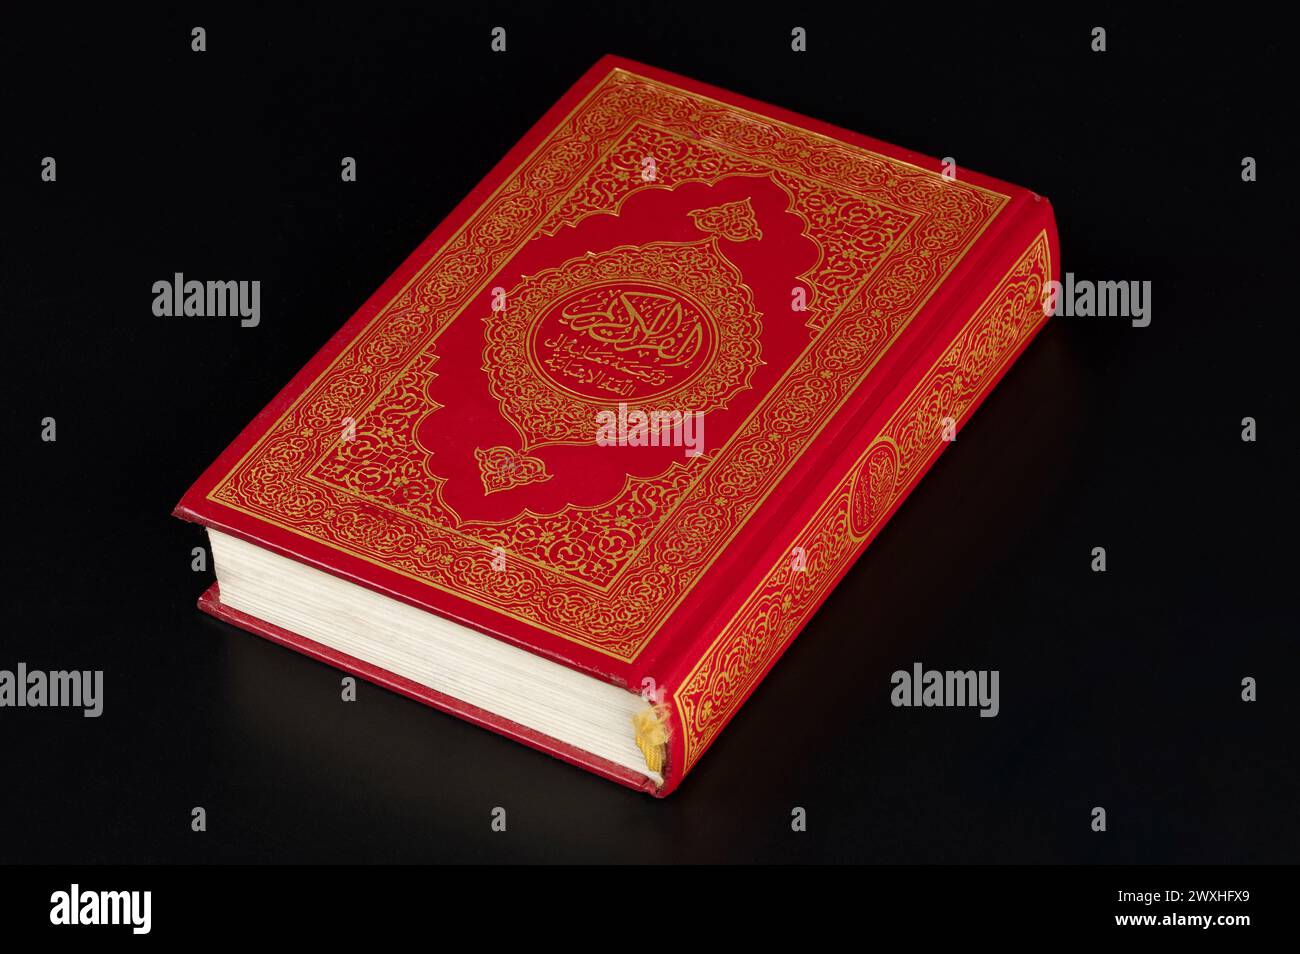 Muslim koran closed book  in red hard cover isolated on black studio background Stock Photo